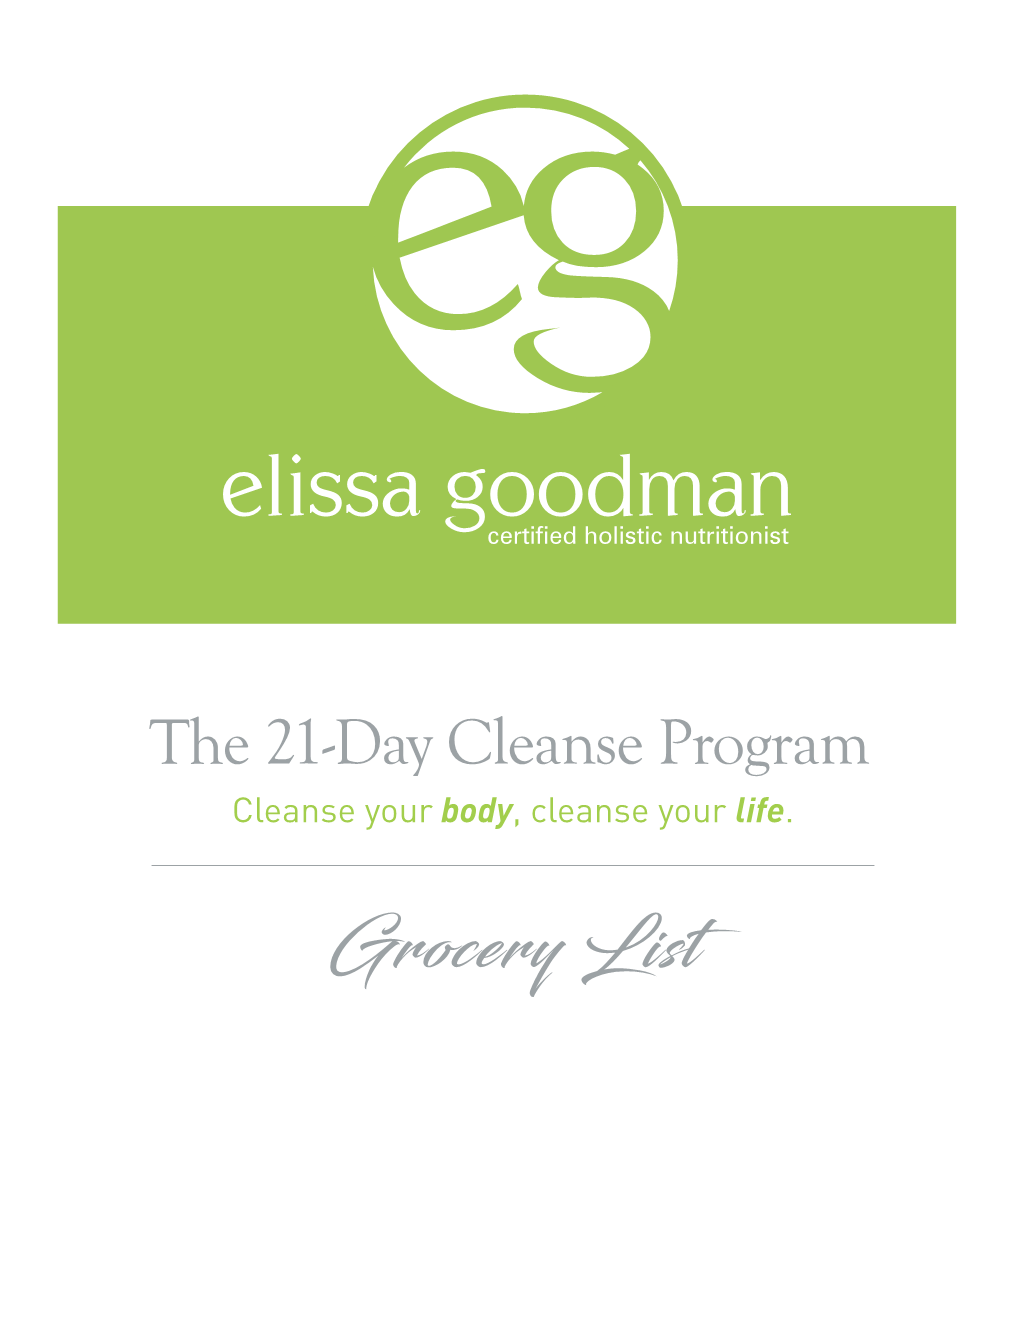 The 21-Day Cleanse Program Cleanse Your Body, Cleanse Your Life